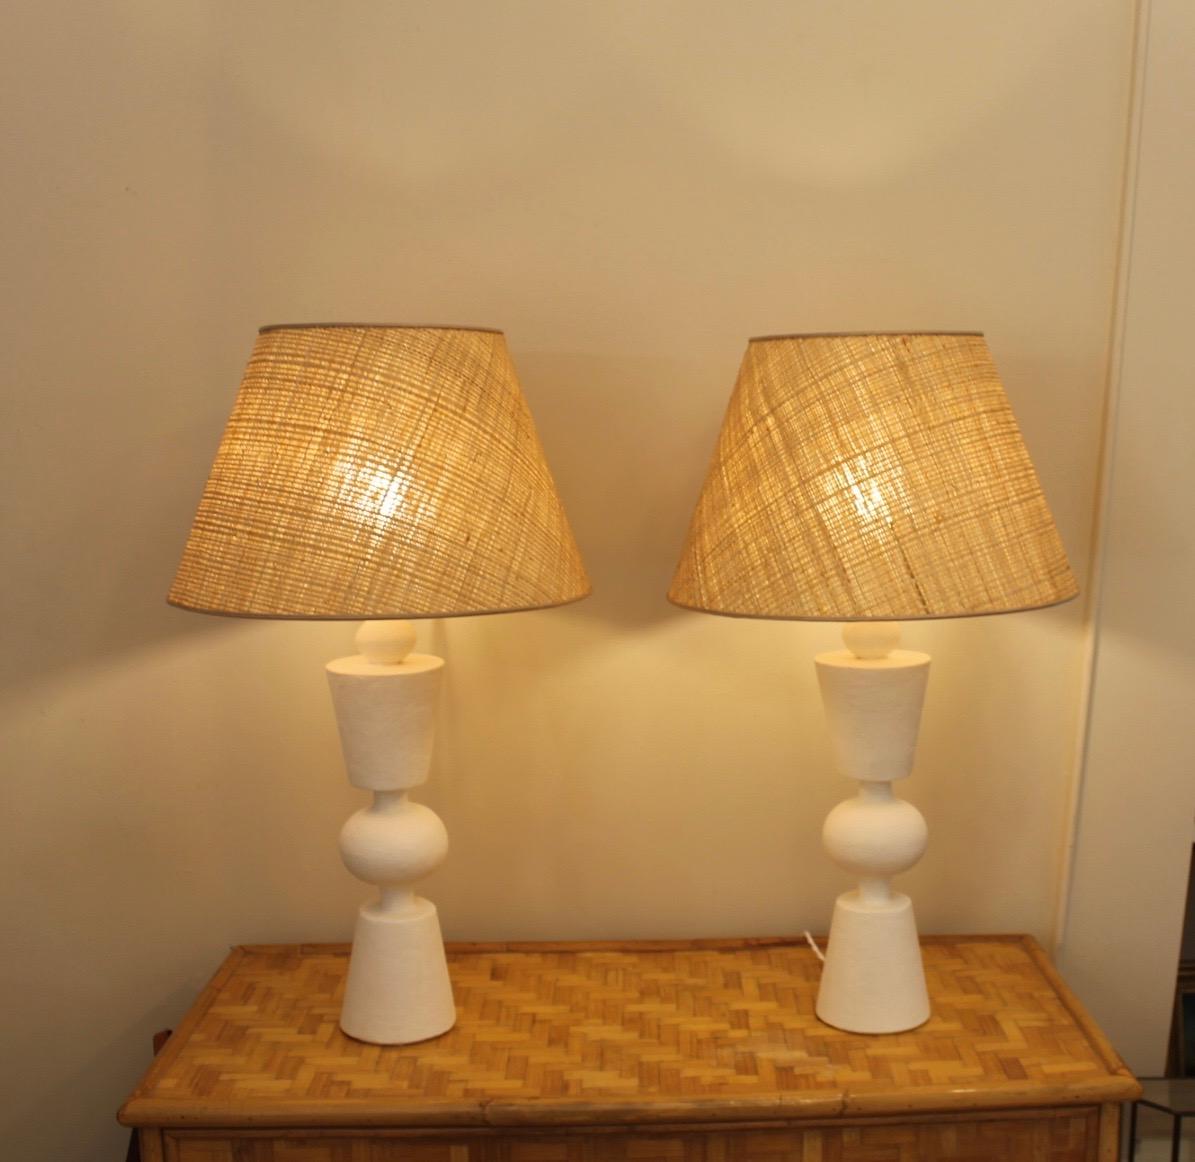 
Pair of plaster lamps, in the style of decorators from the 1940s, French decorators
They are accompanied by a custom-made straw lampshade.
All electrified